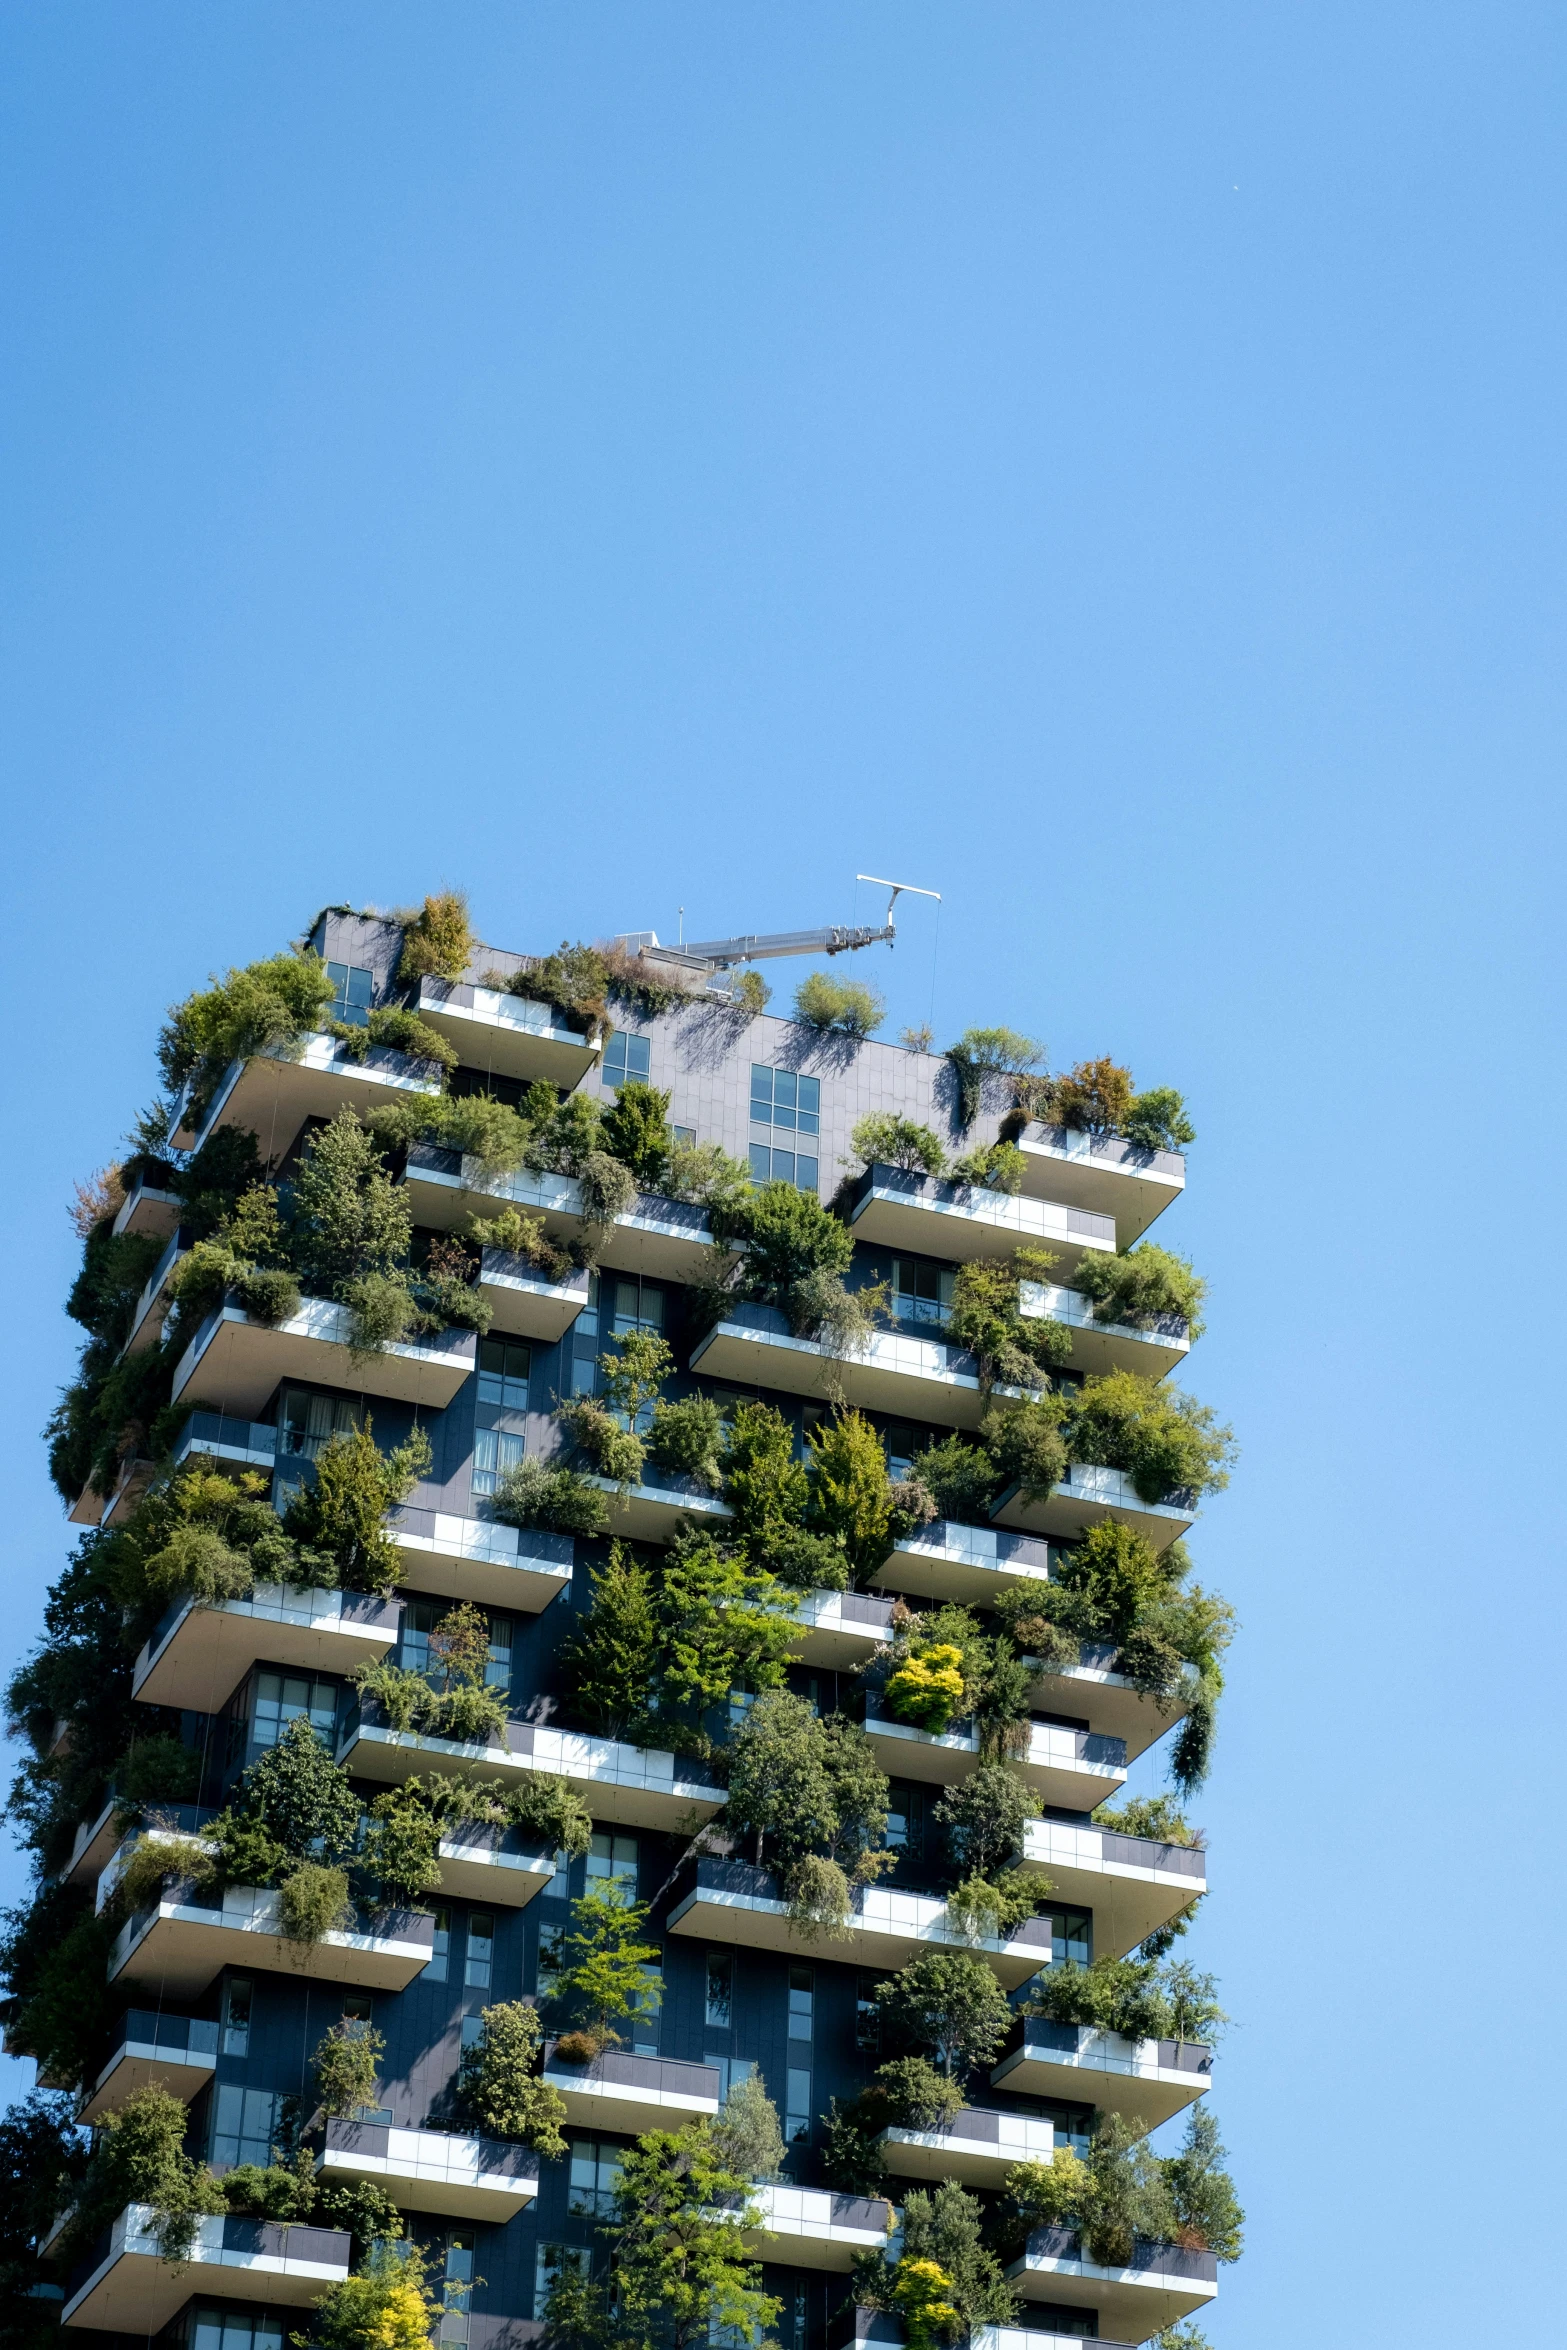 the building has trees growing on it and balconies